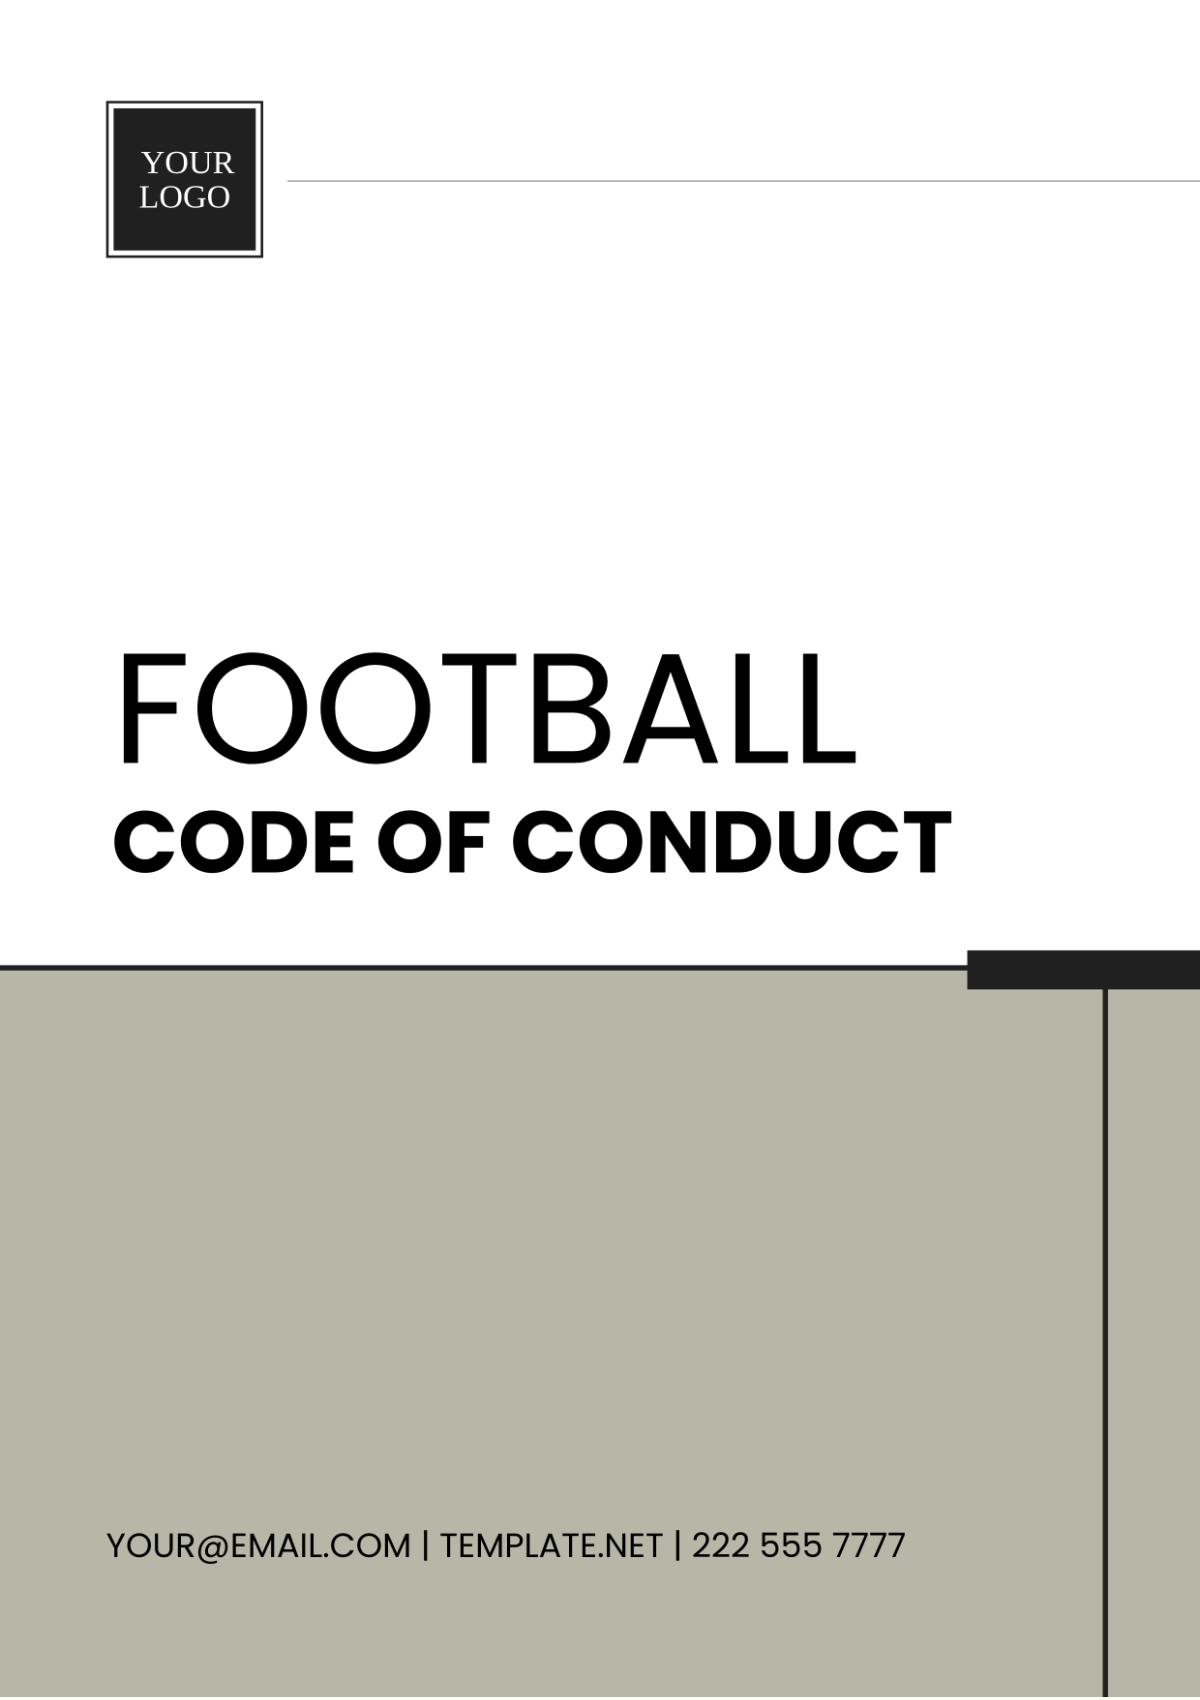 Football Code of Conduct Template